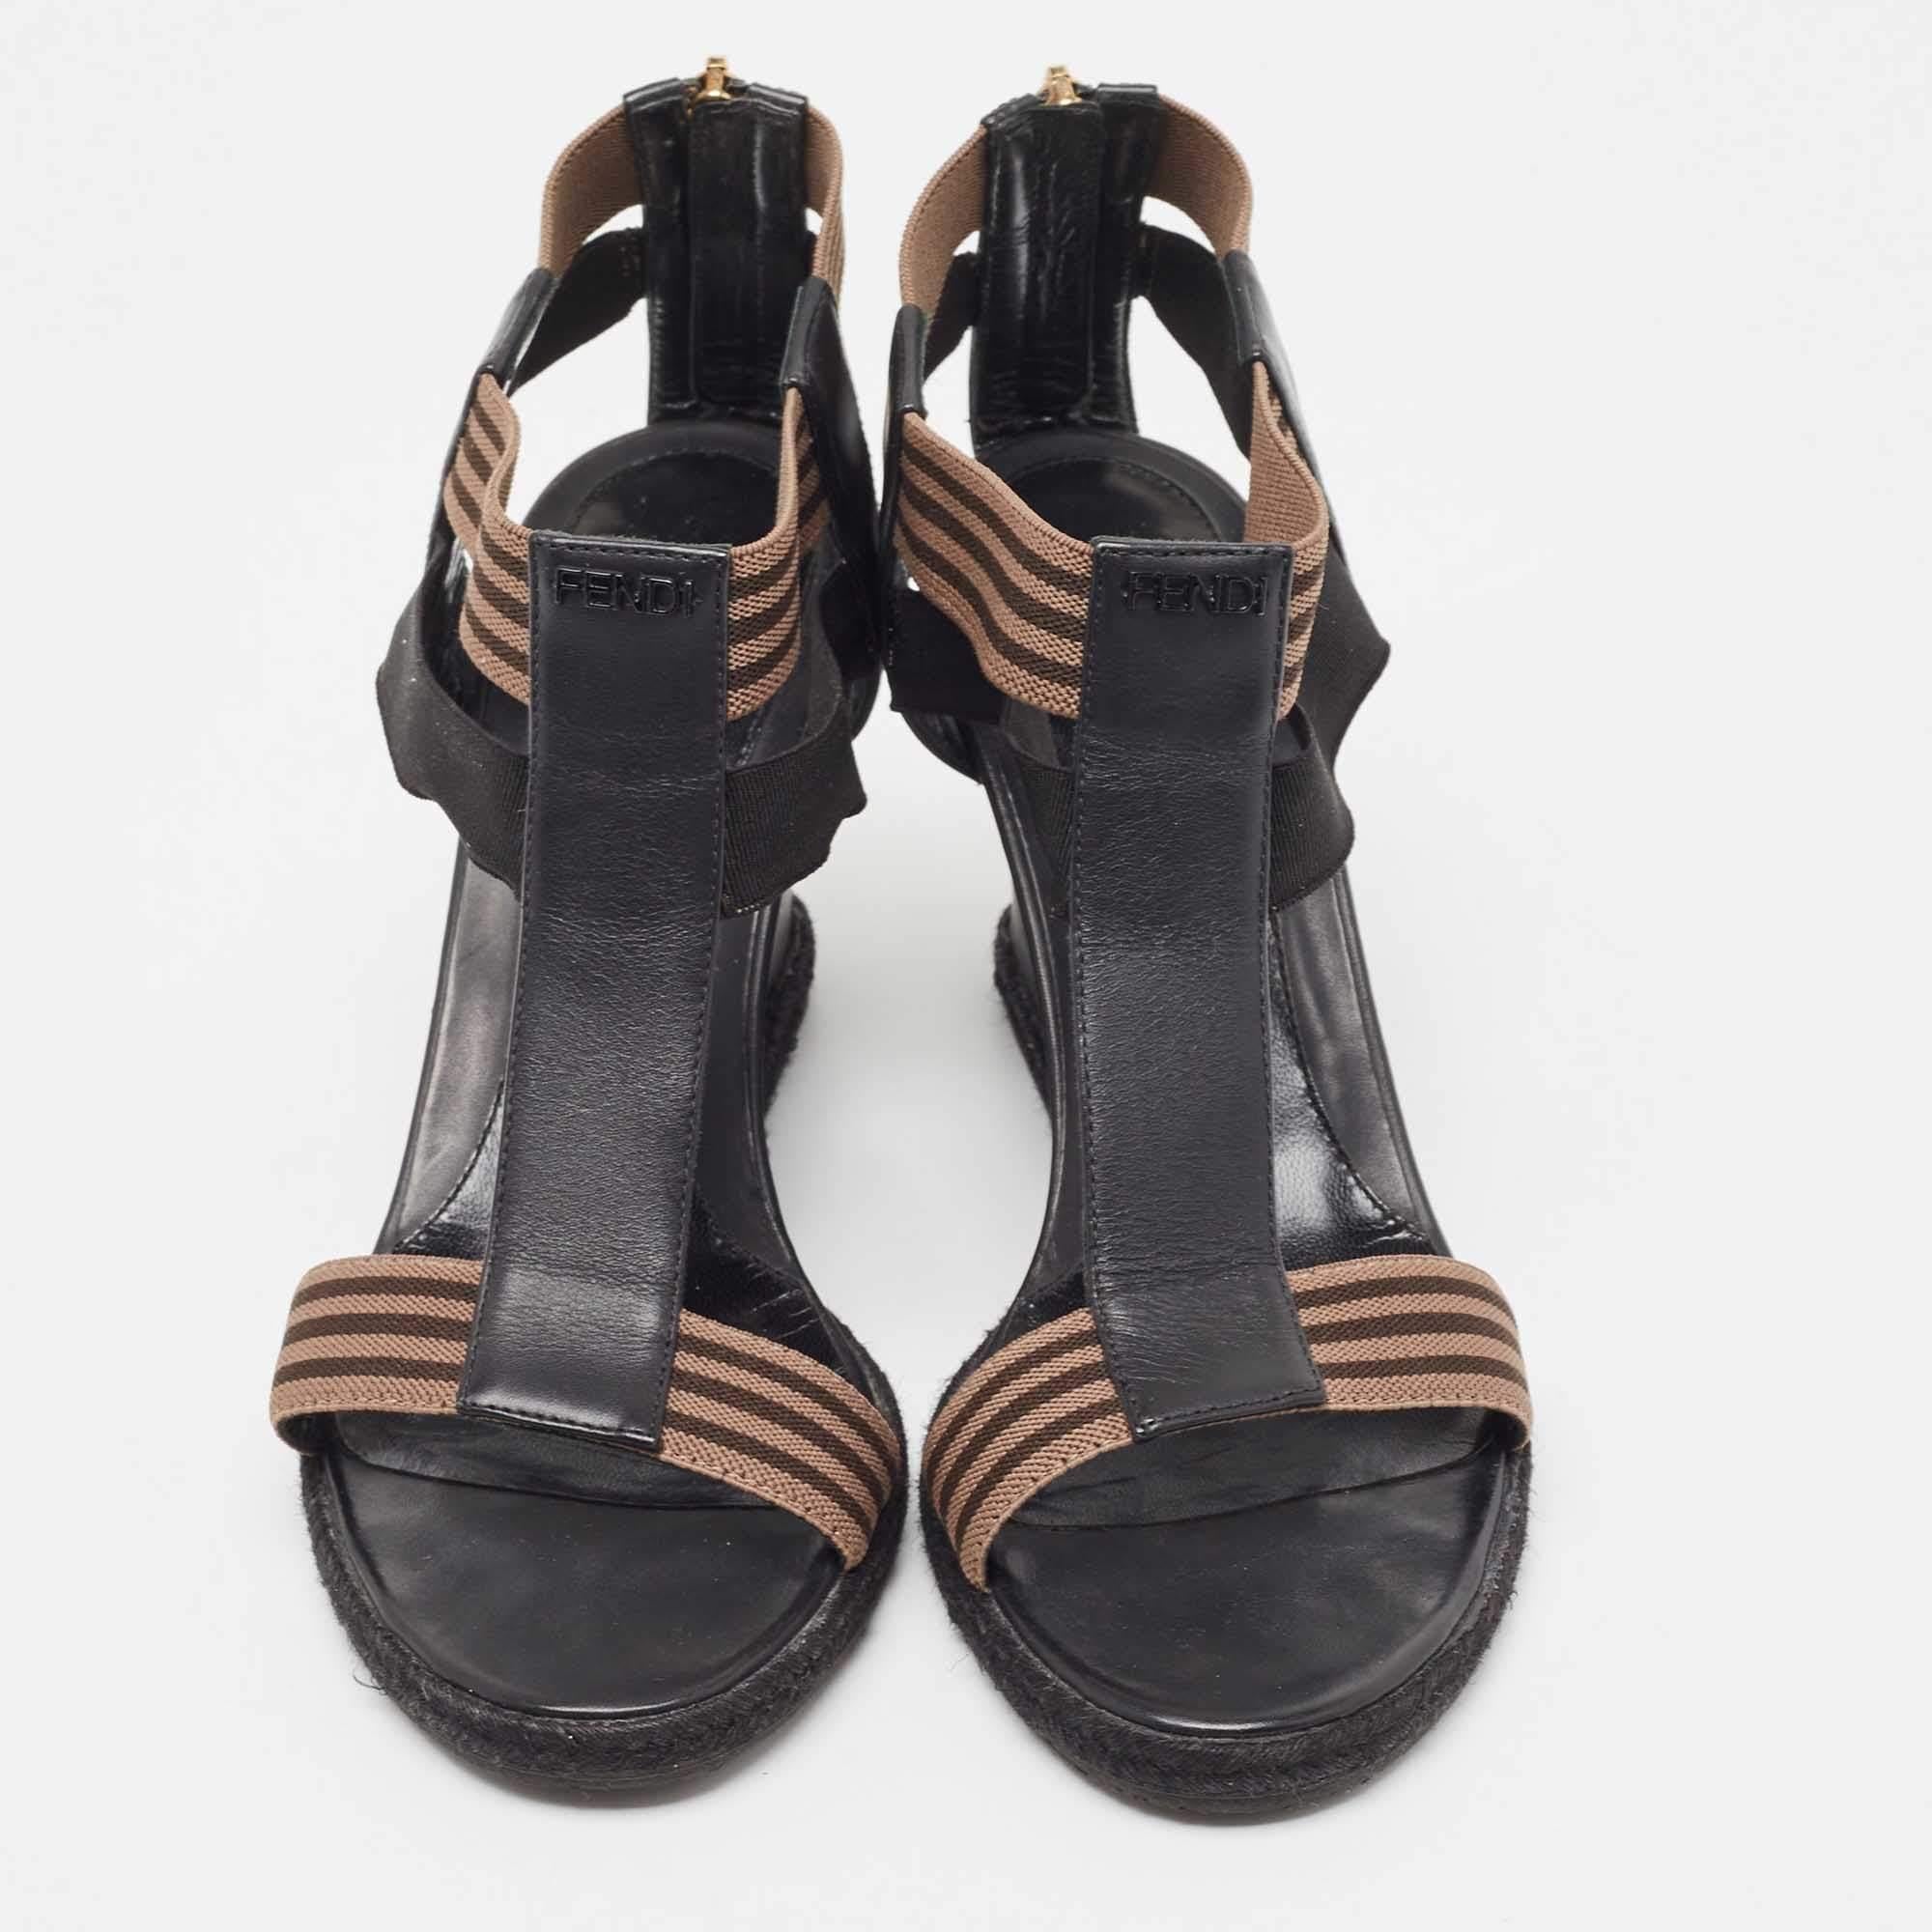 Women's Fendi Black/Brown Leather and Elastic Fabric T-Strap Espadrille Wedge Sandals Si